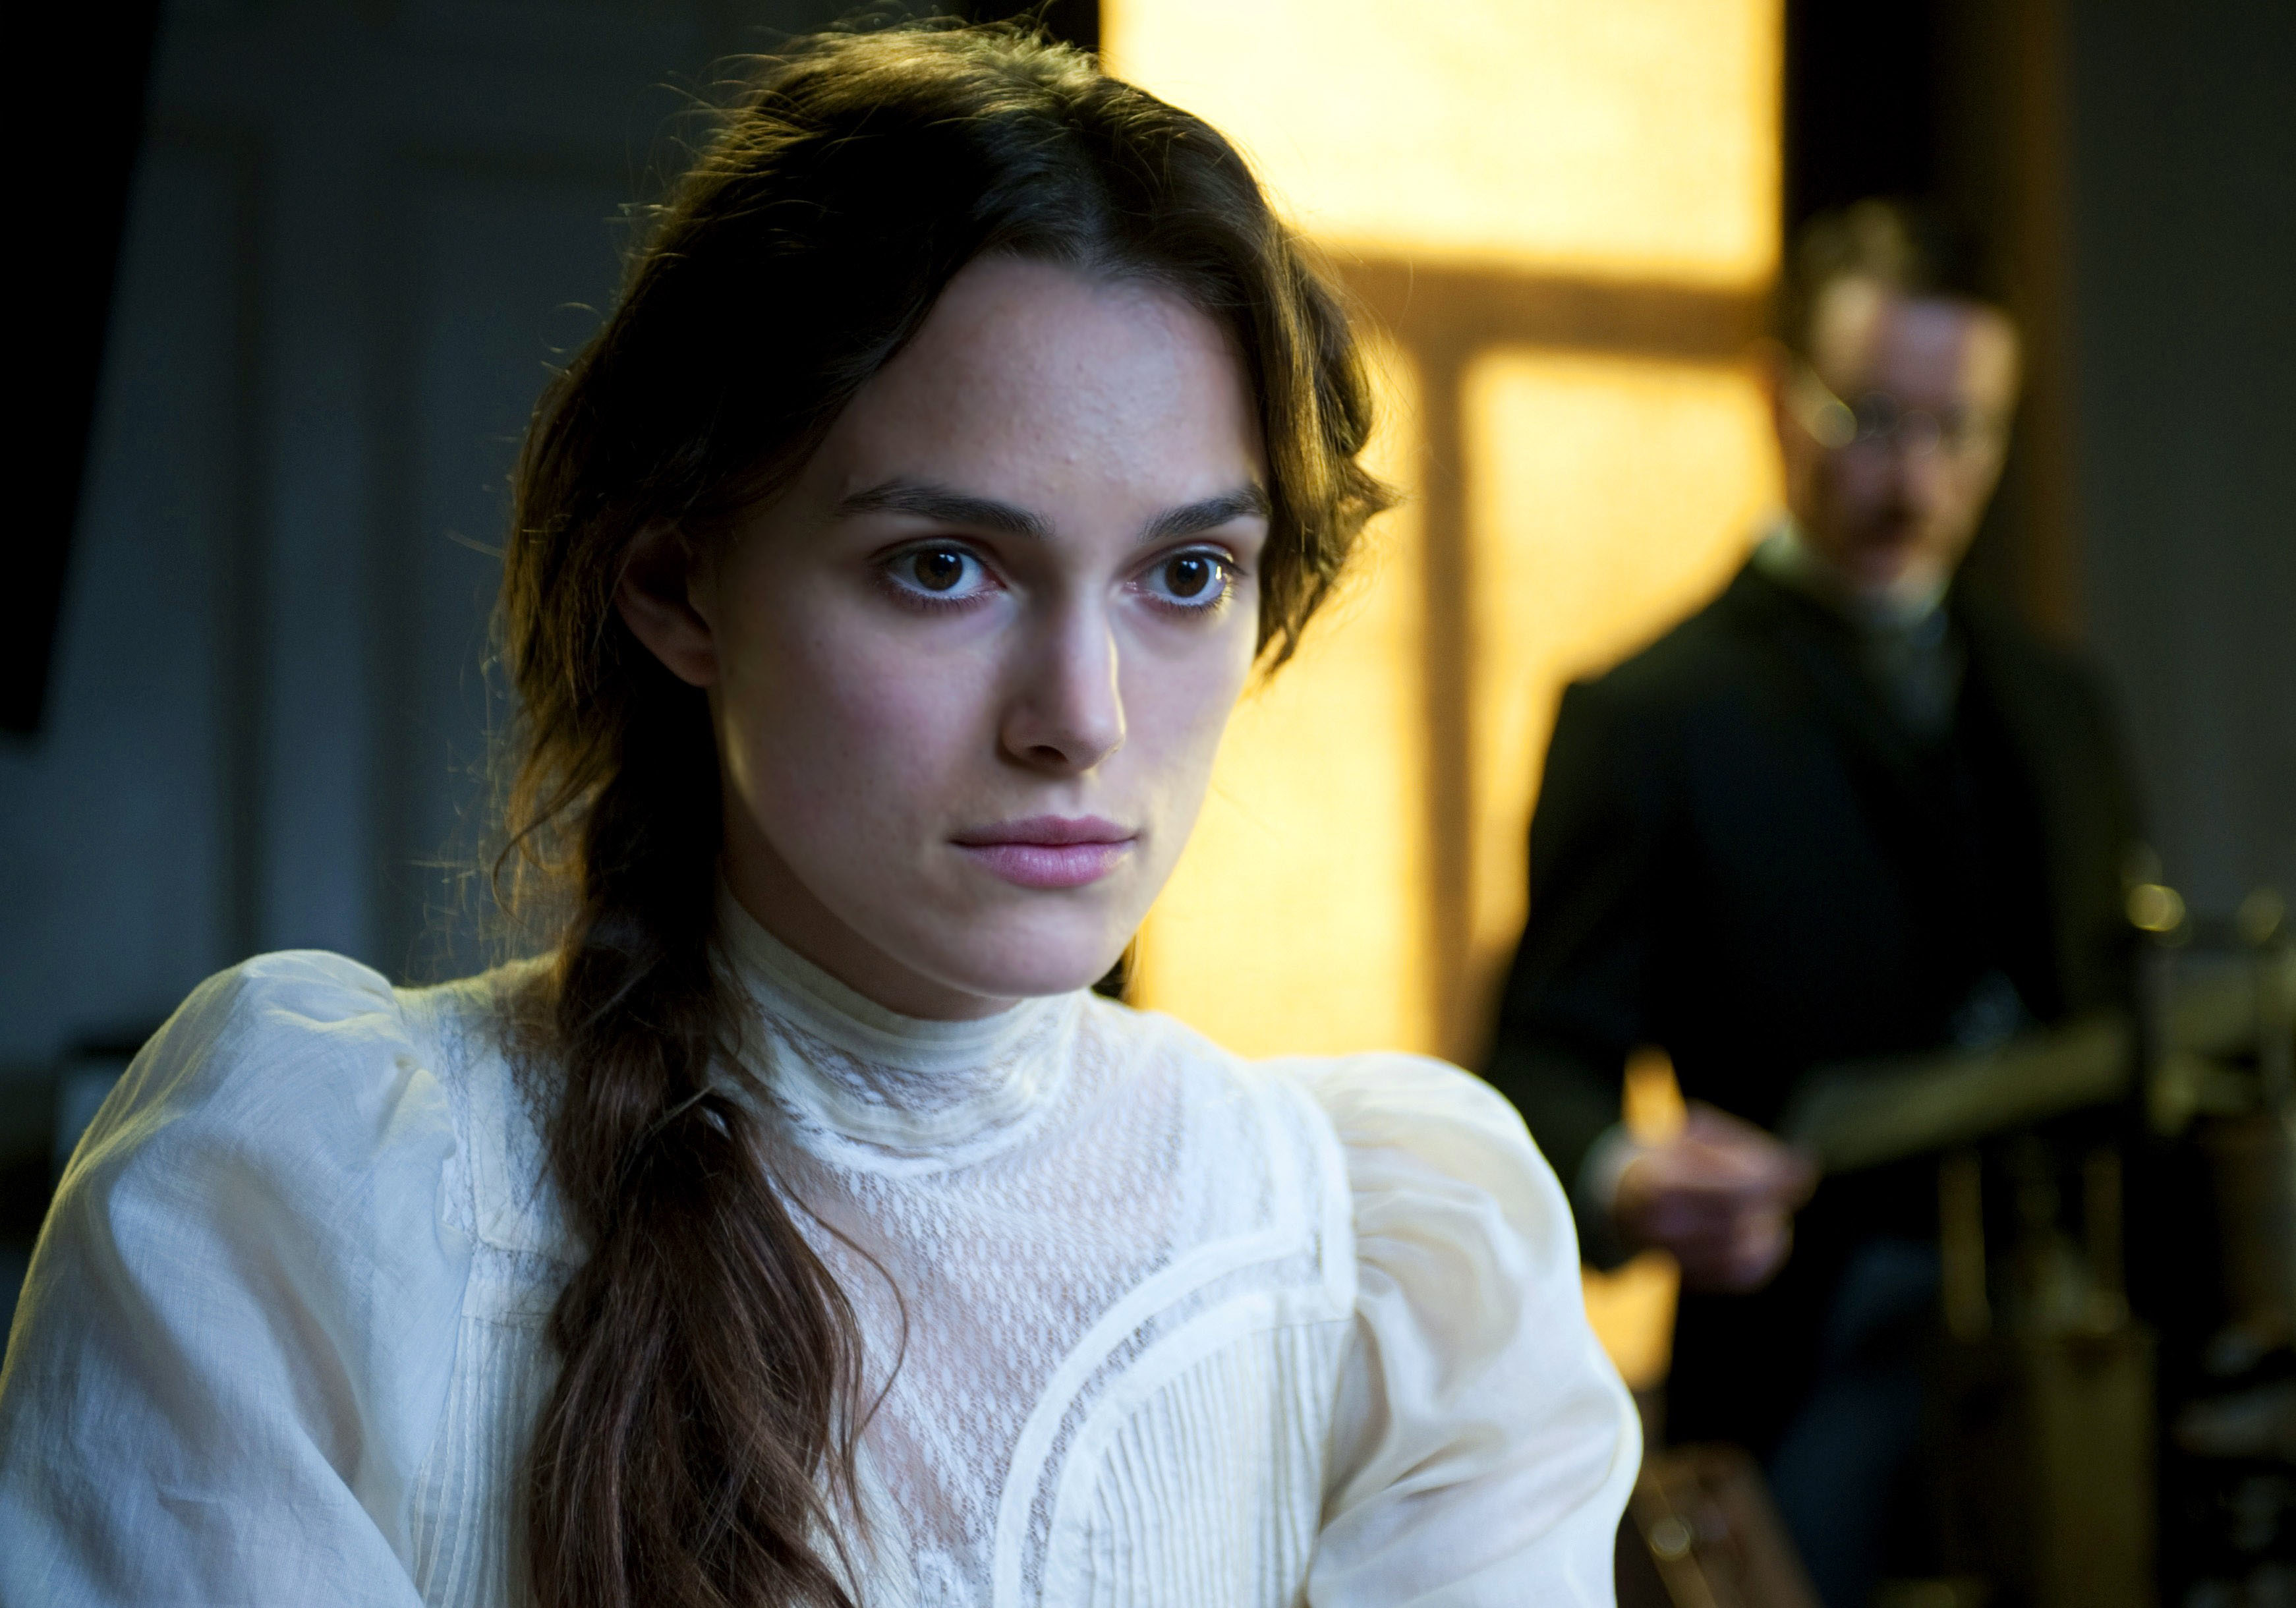 Keira Knightley stares off into space while a rigid man stands far behind her in a dark room